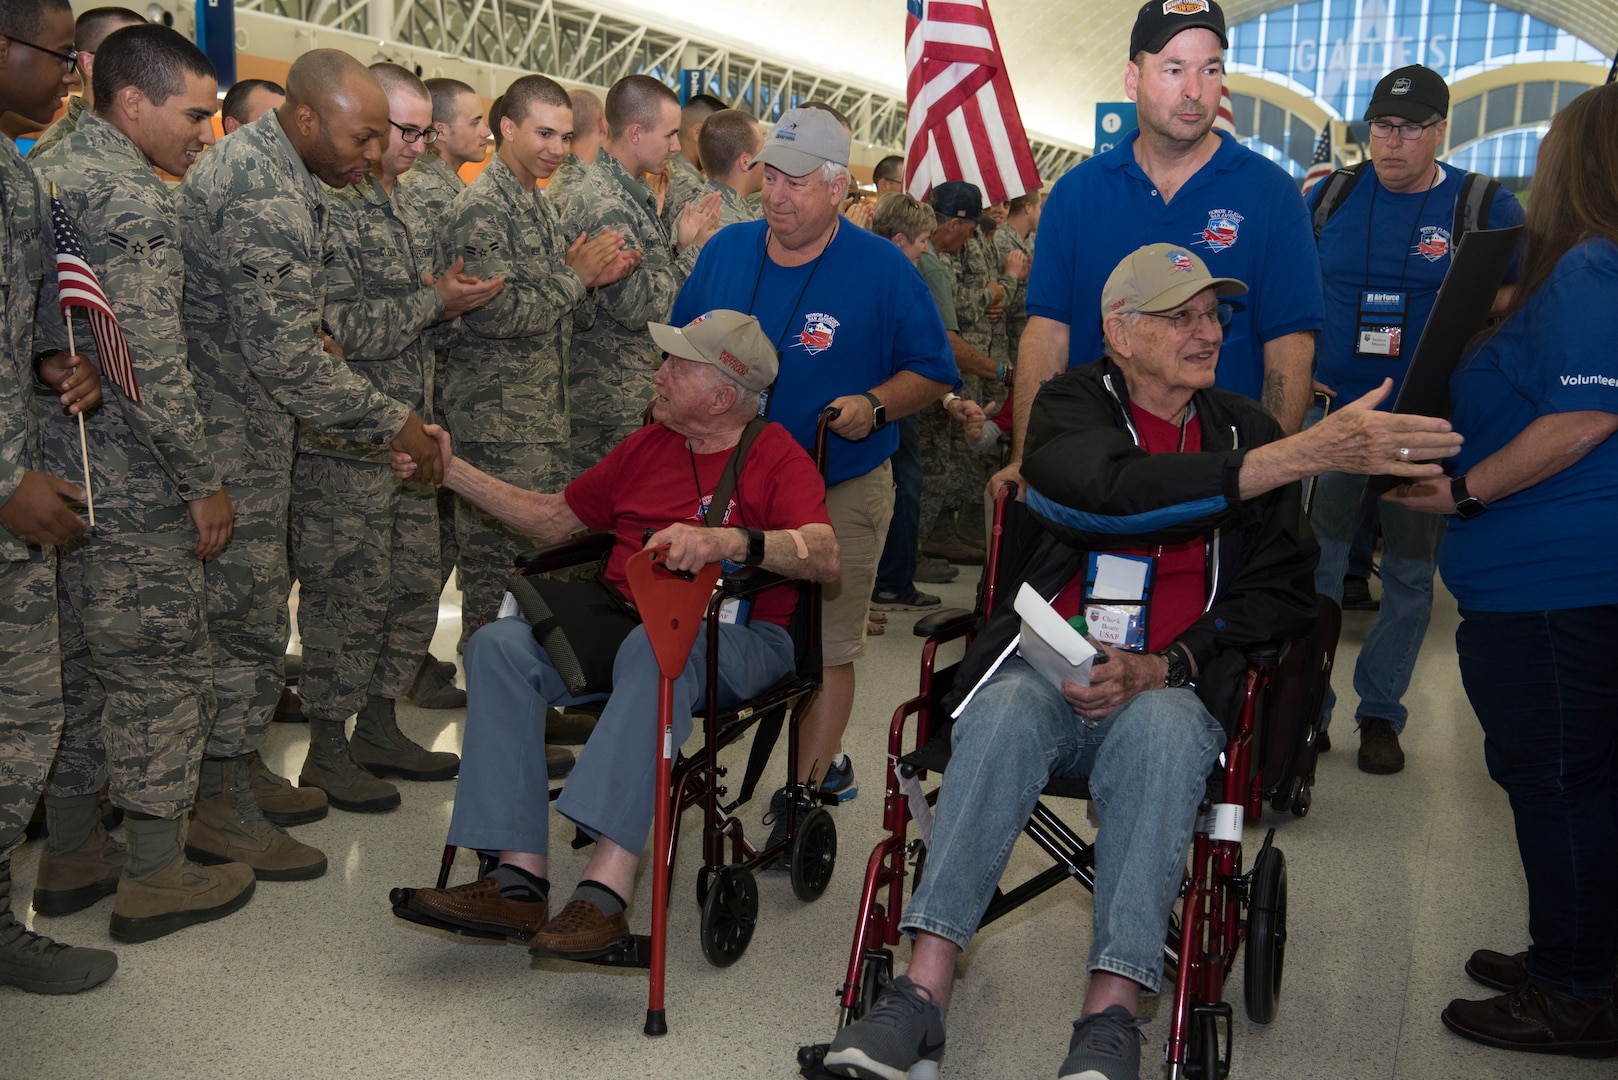 Welcome Home: A Community for Veterans